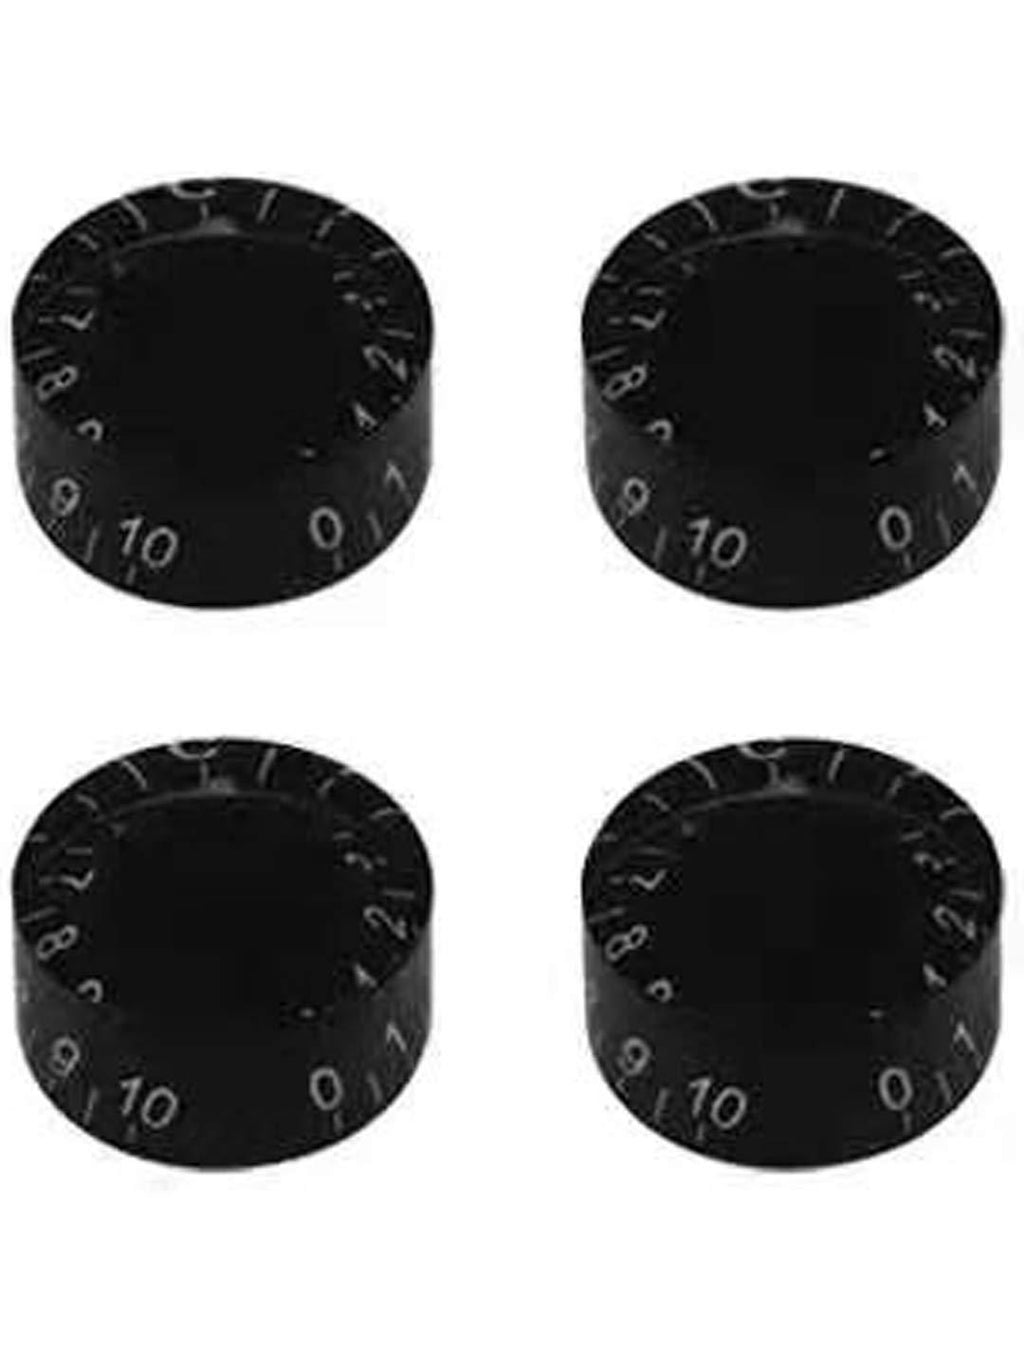 HENGYEE Electric Guitar Top Hat Knobs Speed Volume Tone Control Knobs Compatible with Les Paul LP Style Electric Guitar Parts Replacement Set of 4Pcs. (Black) Black